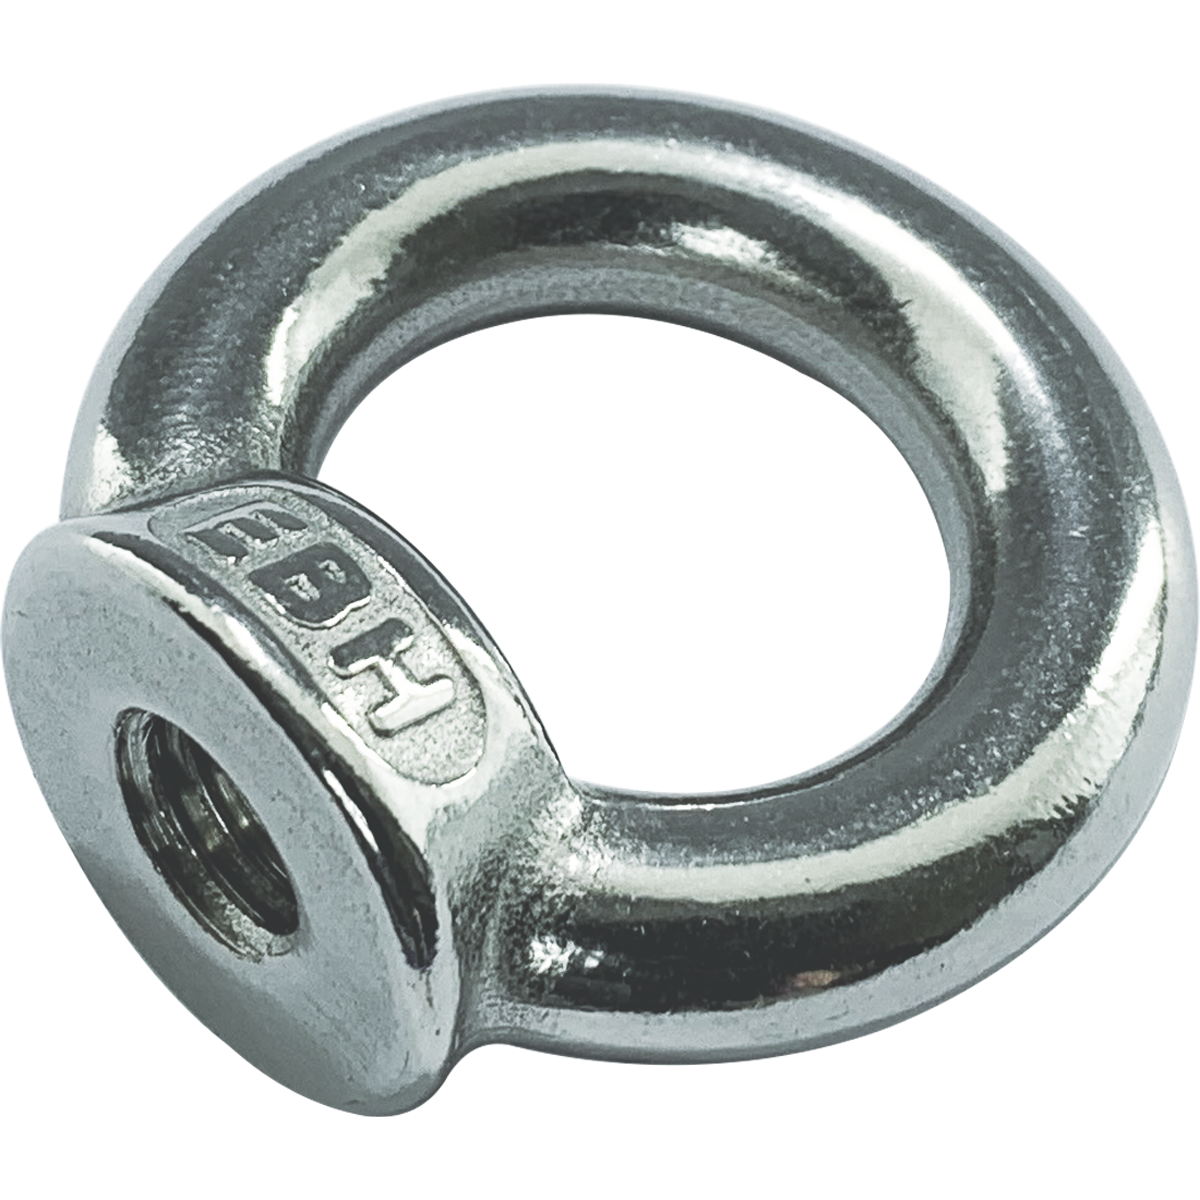 BZP lifting eye nuts - A sturdy rounded section of metal that carries a female thread, used to thread securely onto a threaded shank